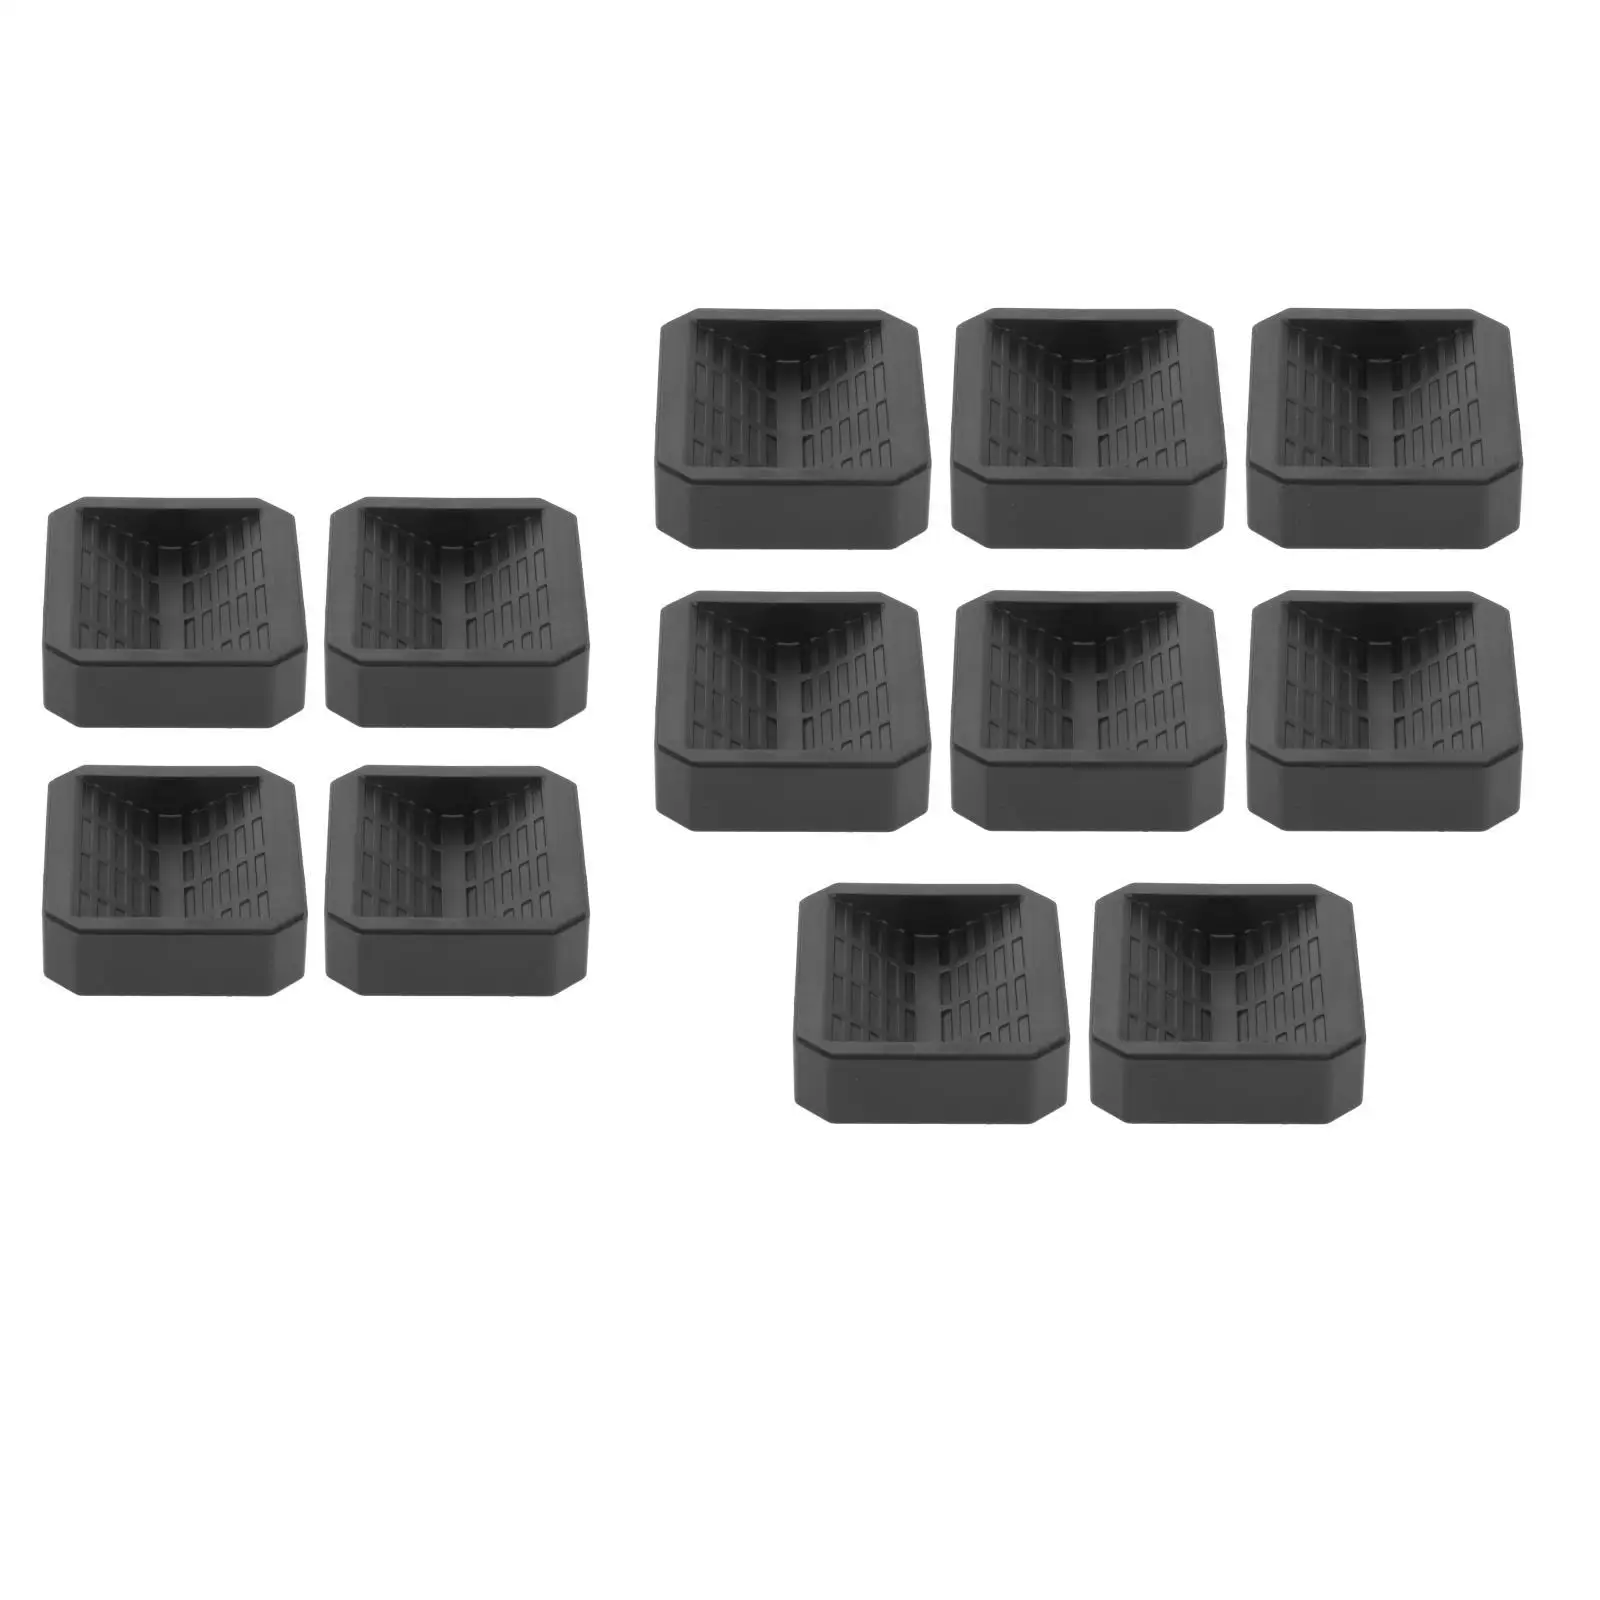 

Furniture Caster Cups Silent Floor Protectors Non Slip Noise Reducing Plastic Casters Furniture Wheel Stoppers for Beds Chairs